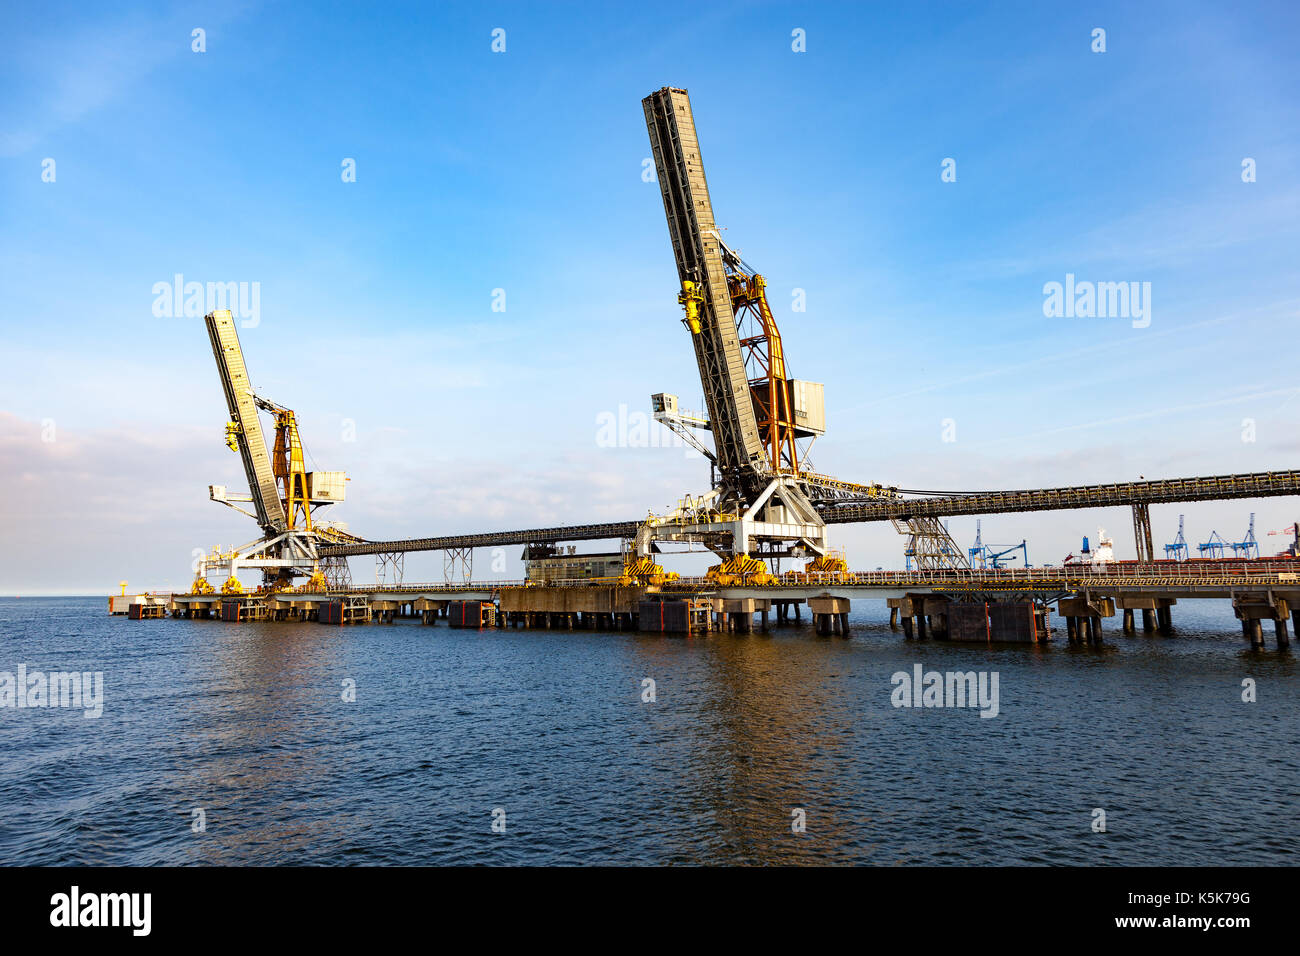 Coal pier at morning in port of Gdansk, Poland. Stock Photo